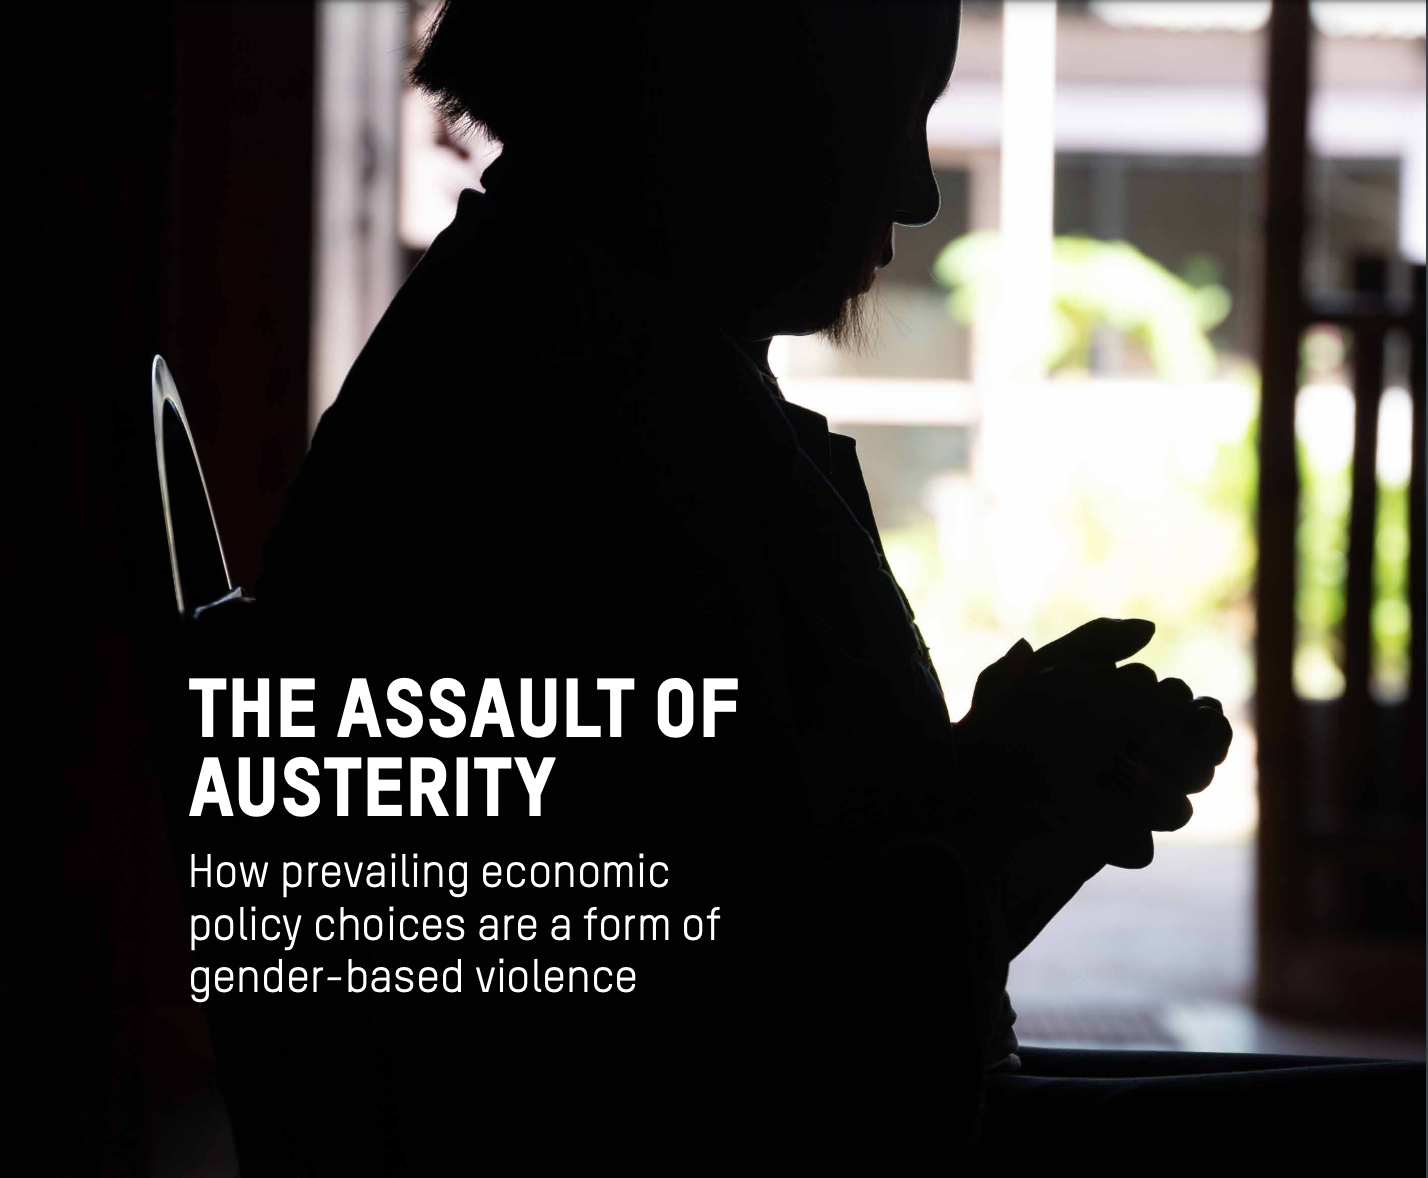 The Assault of Austerity: How prevailing economic policy choices are a form of gender-based violence - Relief Web Report